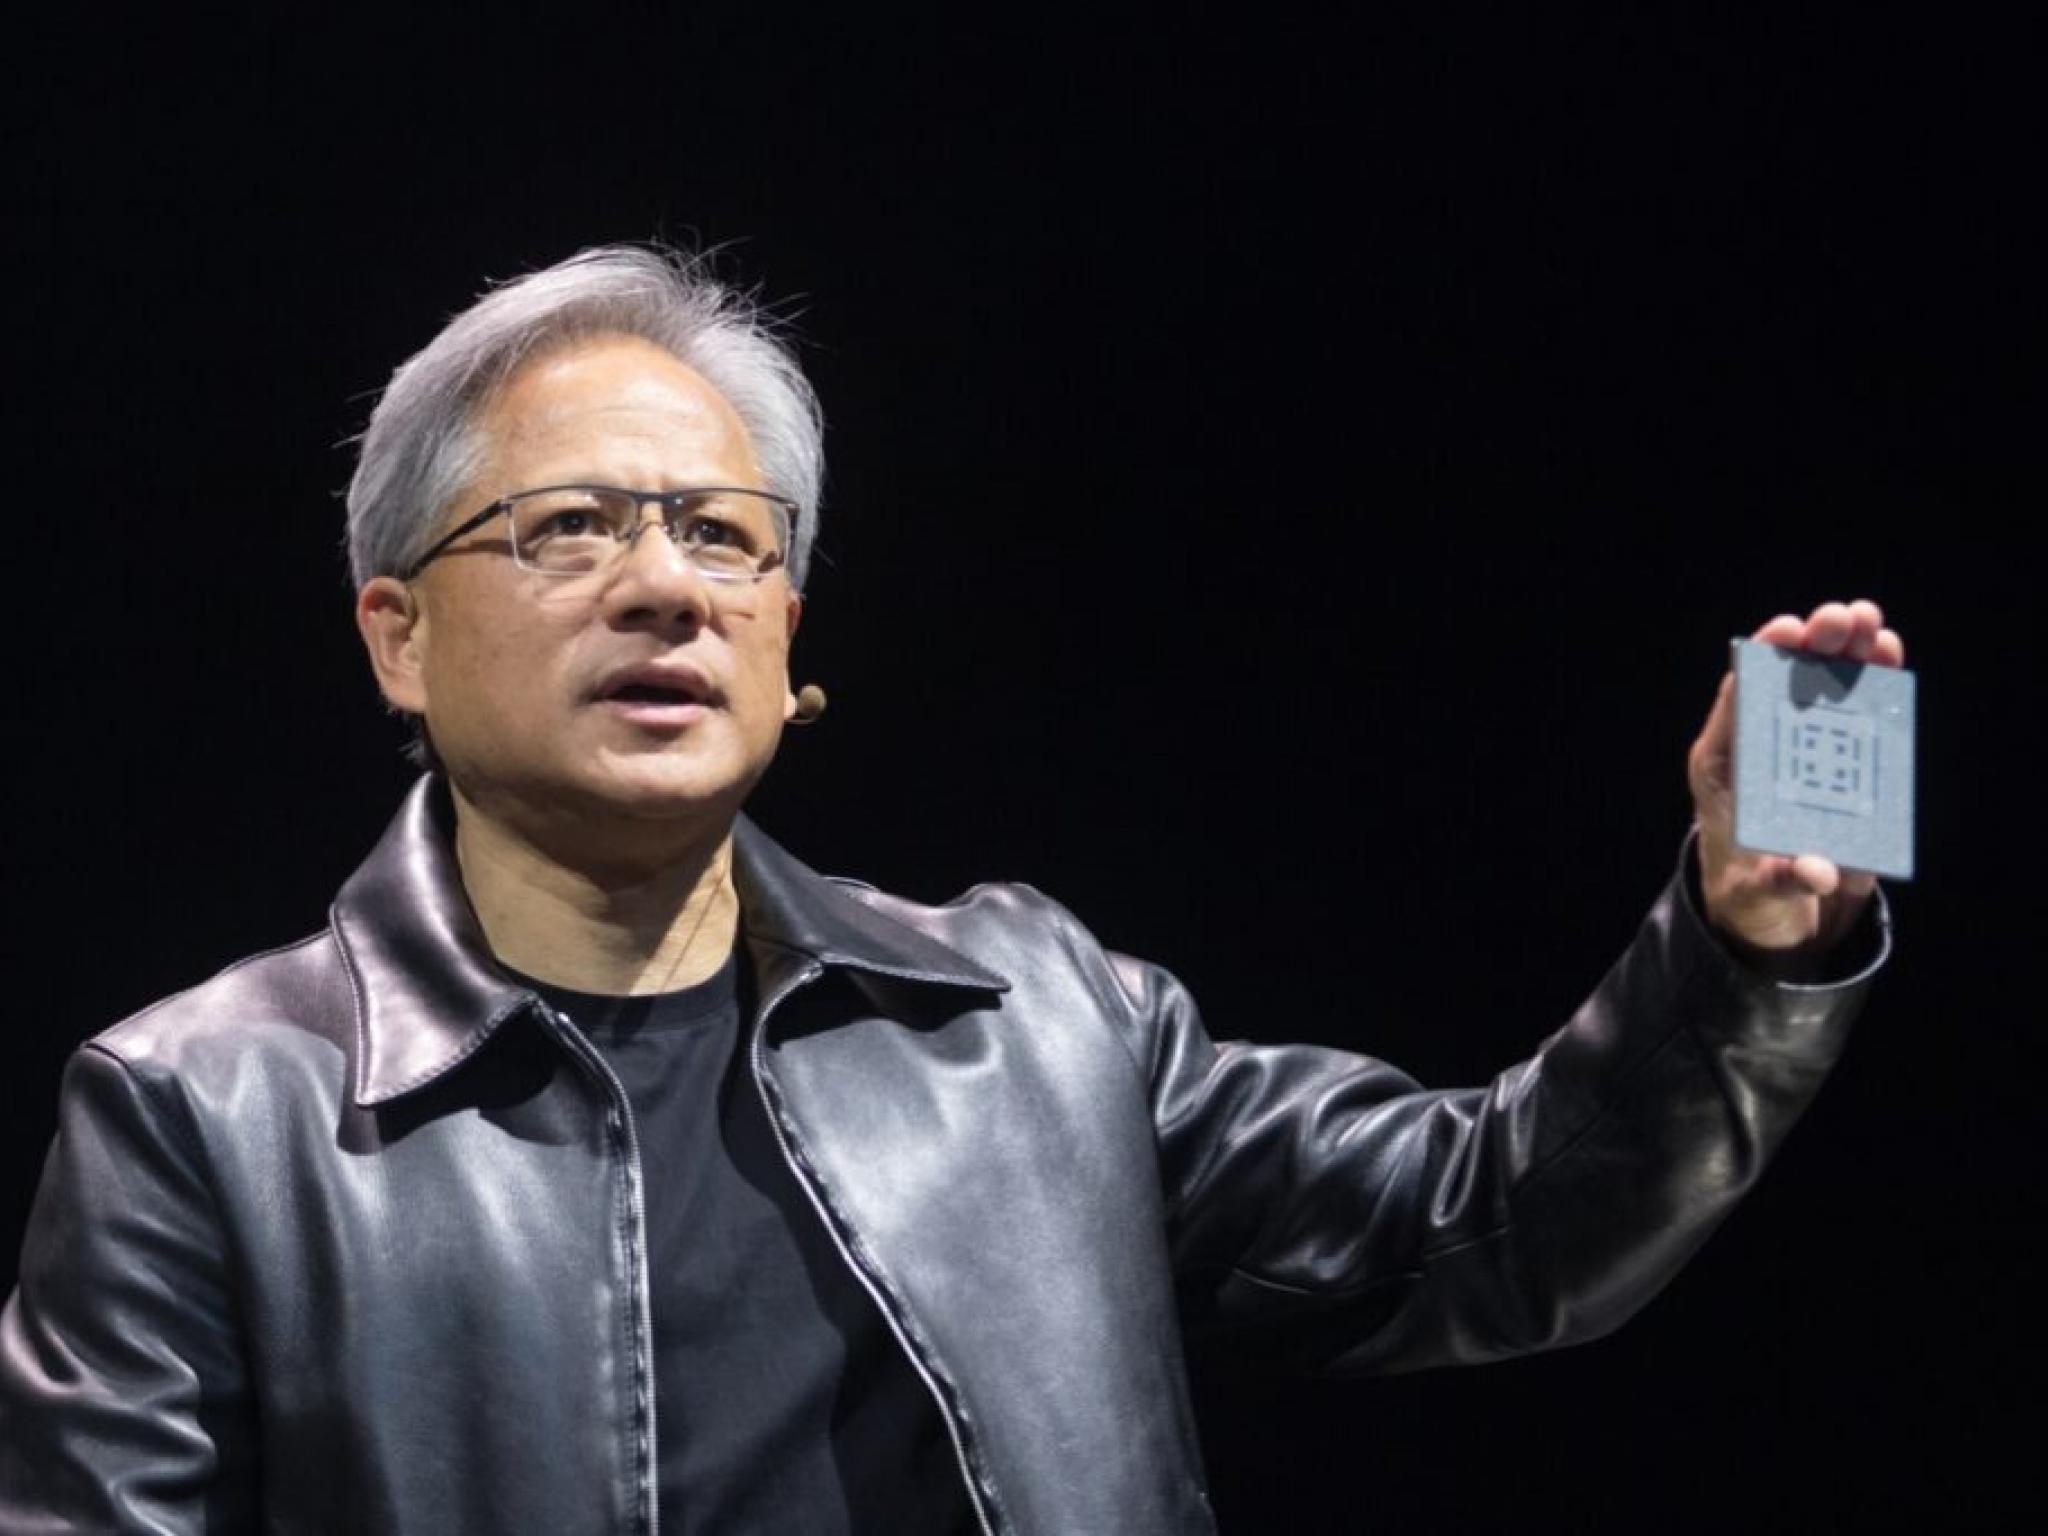  while-jensen-huang-is-bullish-about-nvidias-future-report-says-his-25-trillion-booming-ai-business-faces-challenges-from-rivals-and-market-dynamics 